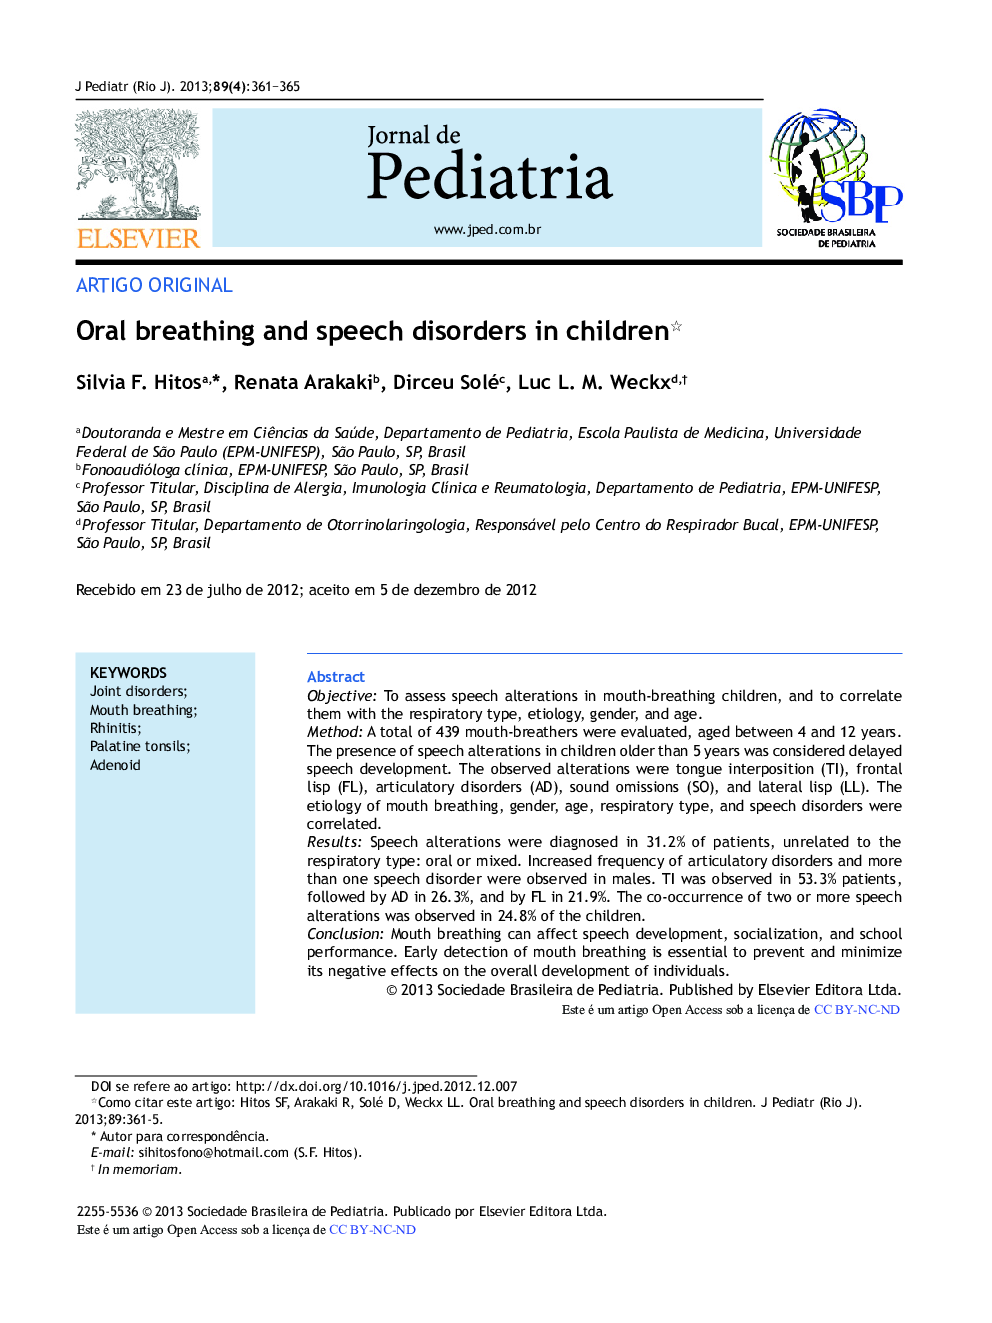 Oral breathing and speech disorders in children 